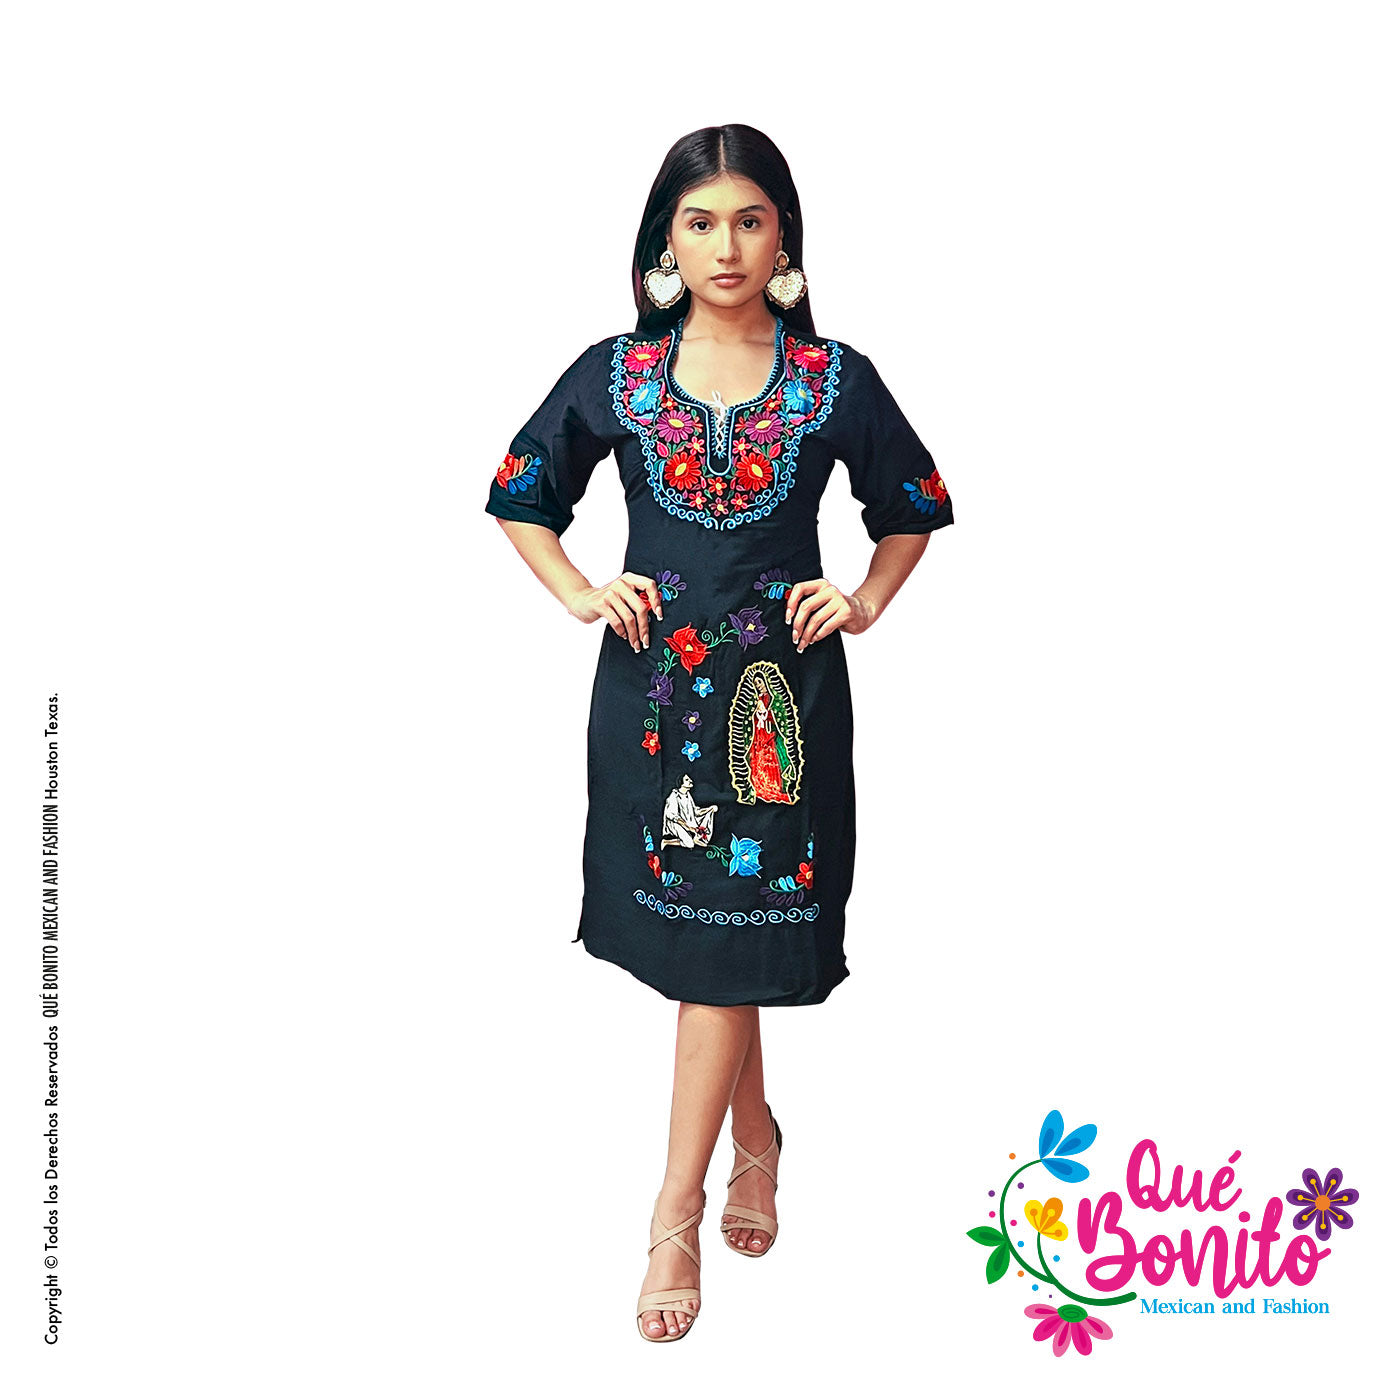 Traditional Virgen de Guadalupe Dress Que Bonito Mexican and Fashion